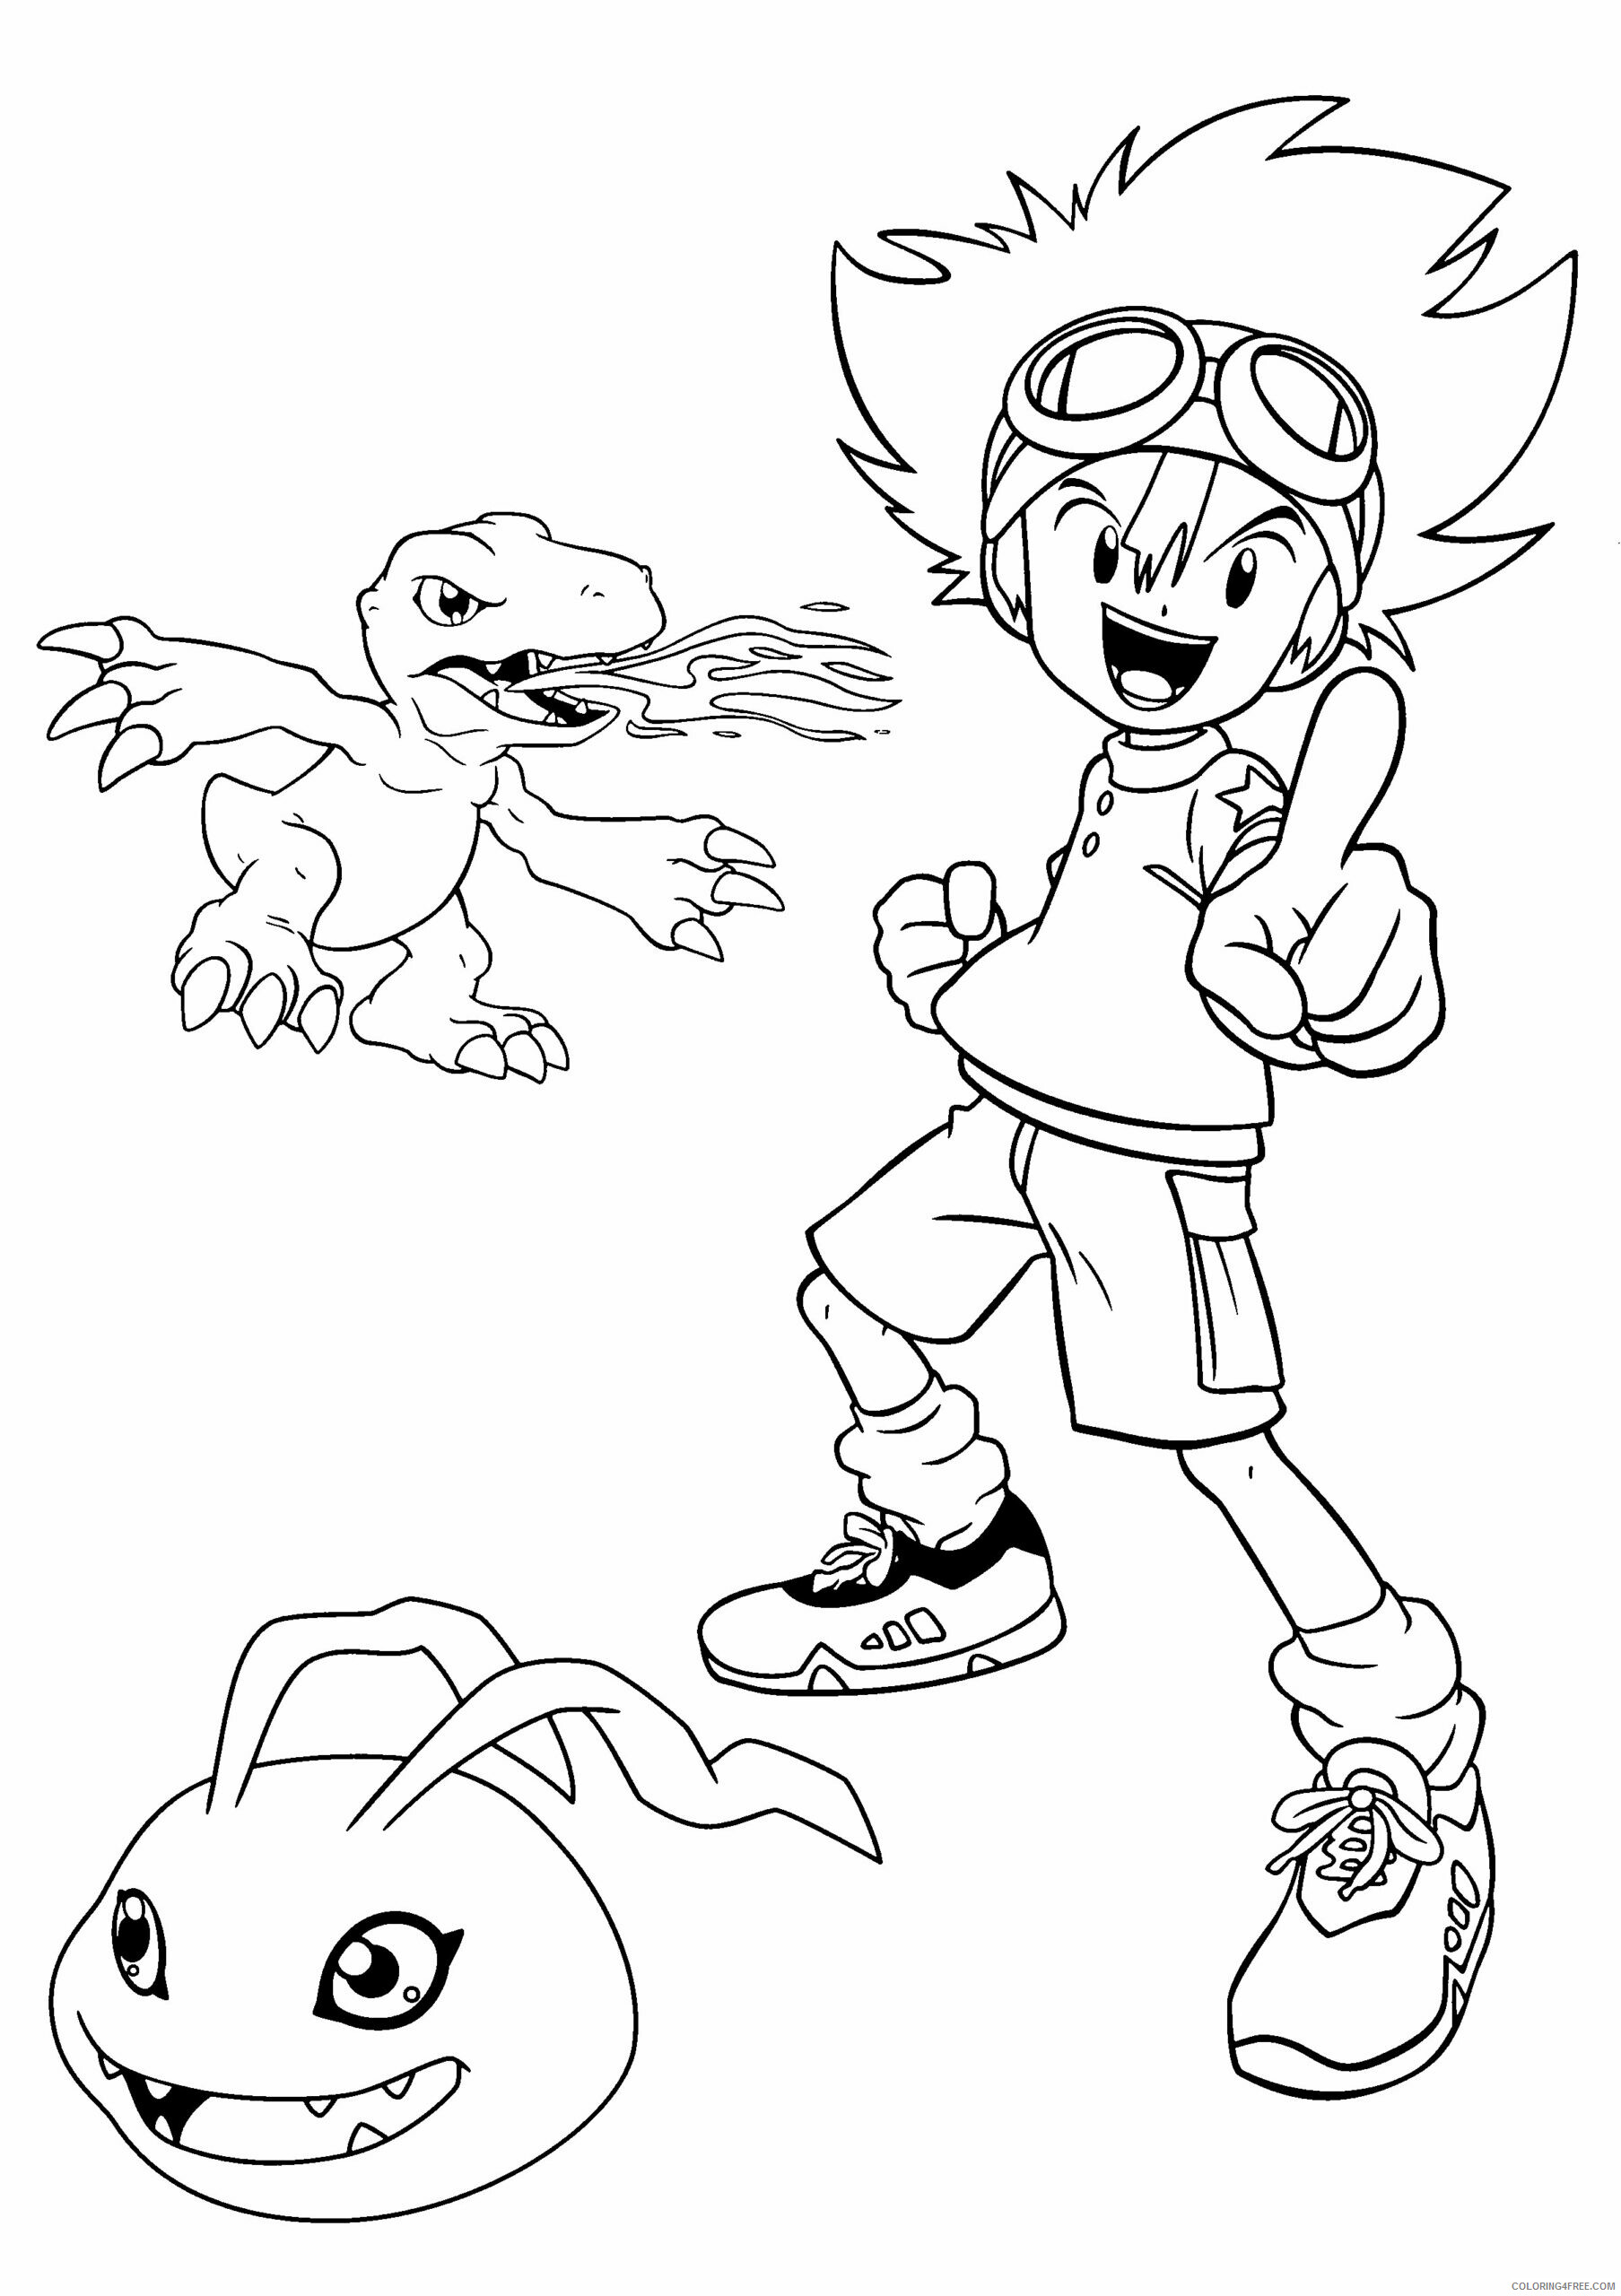 Digimon Printable Coloring Pages Anime digimon 104 2021 0211 Coloring4free